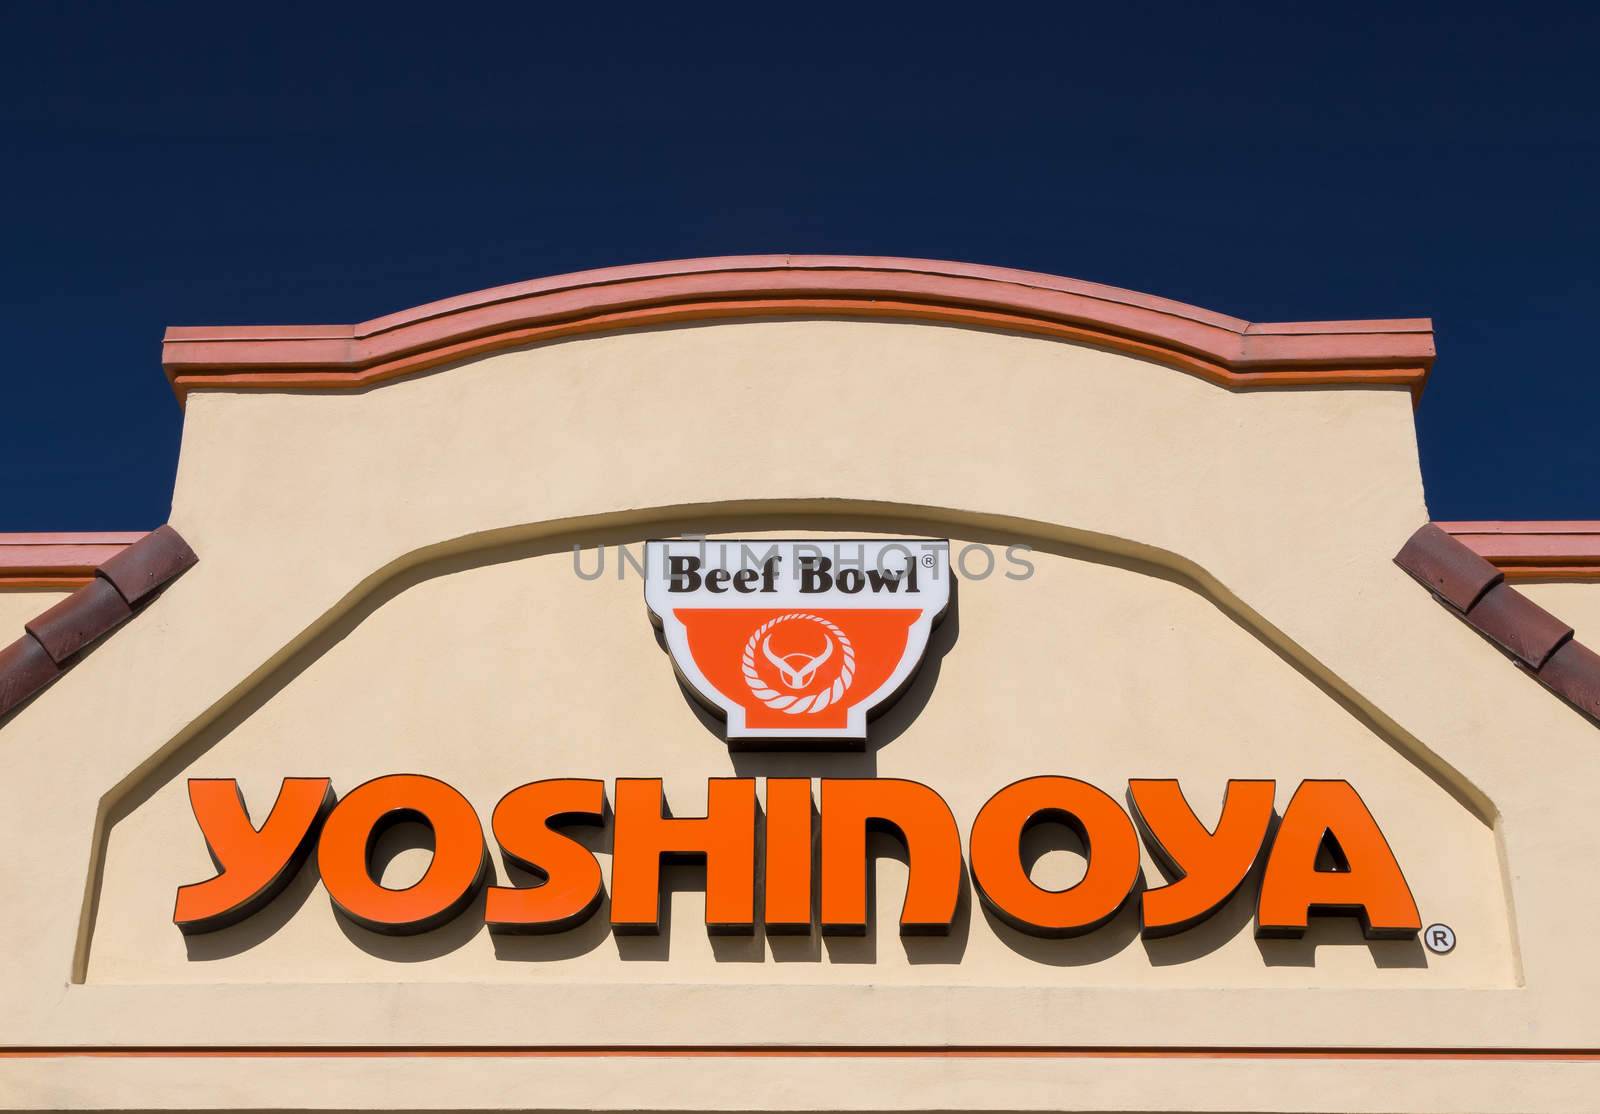 Yoshinoya Beef Bowl Restaurant Exterior and Sign. by wolterk